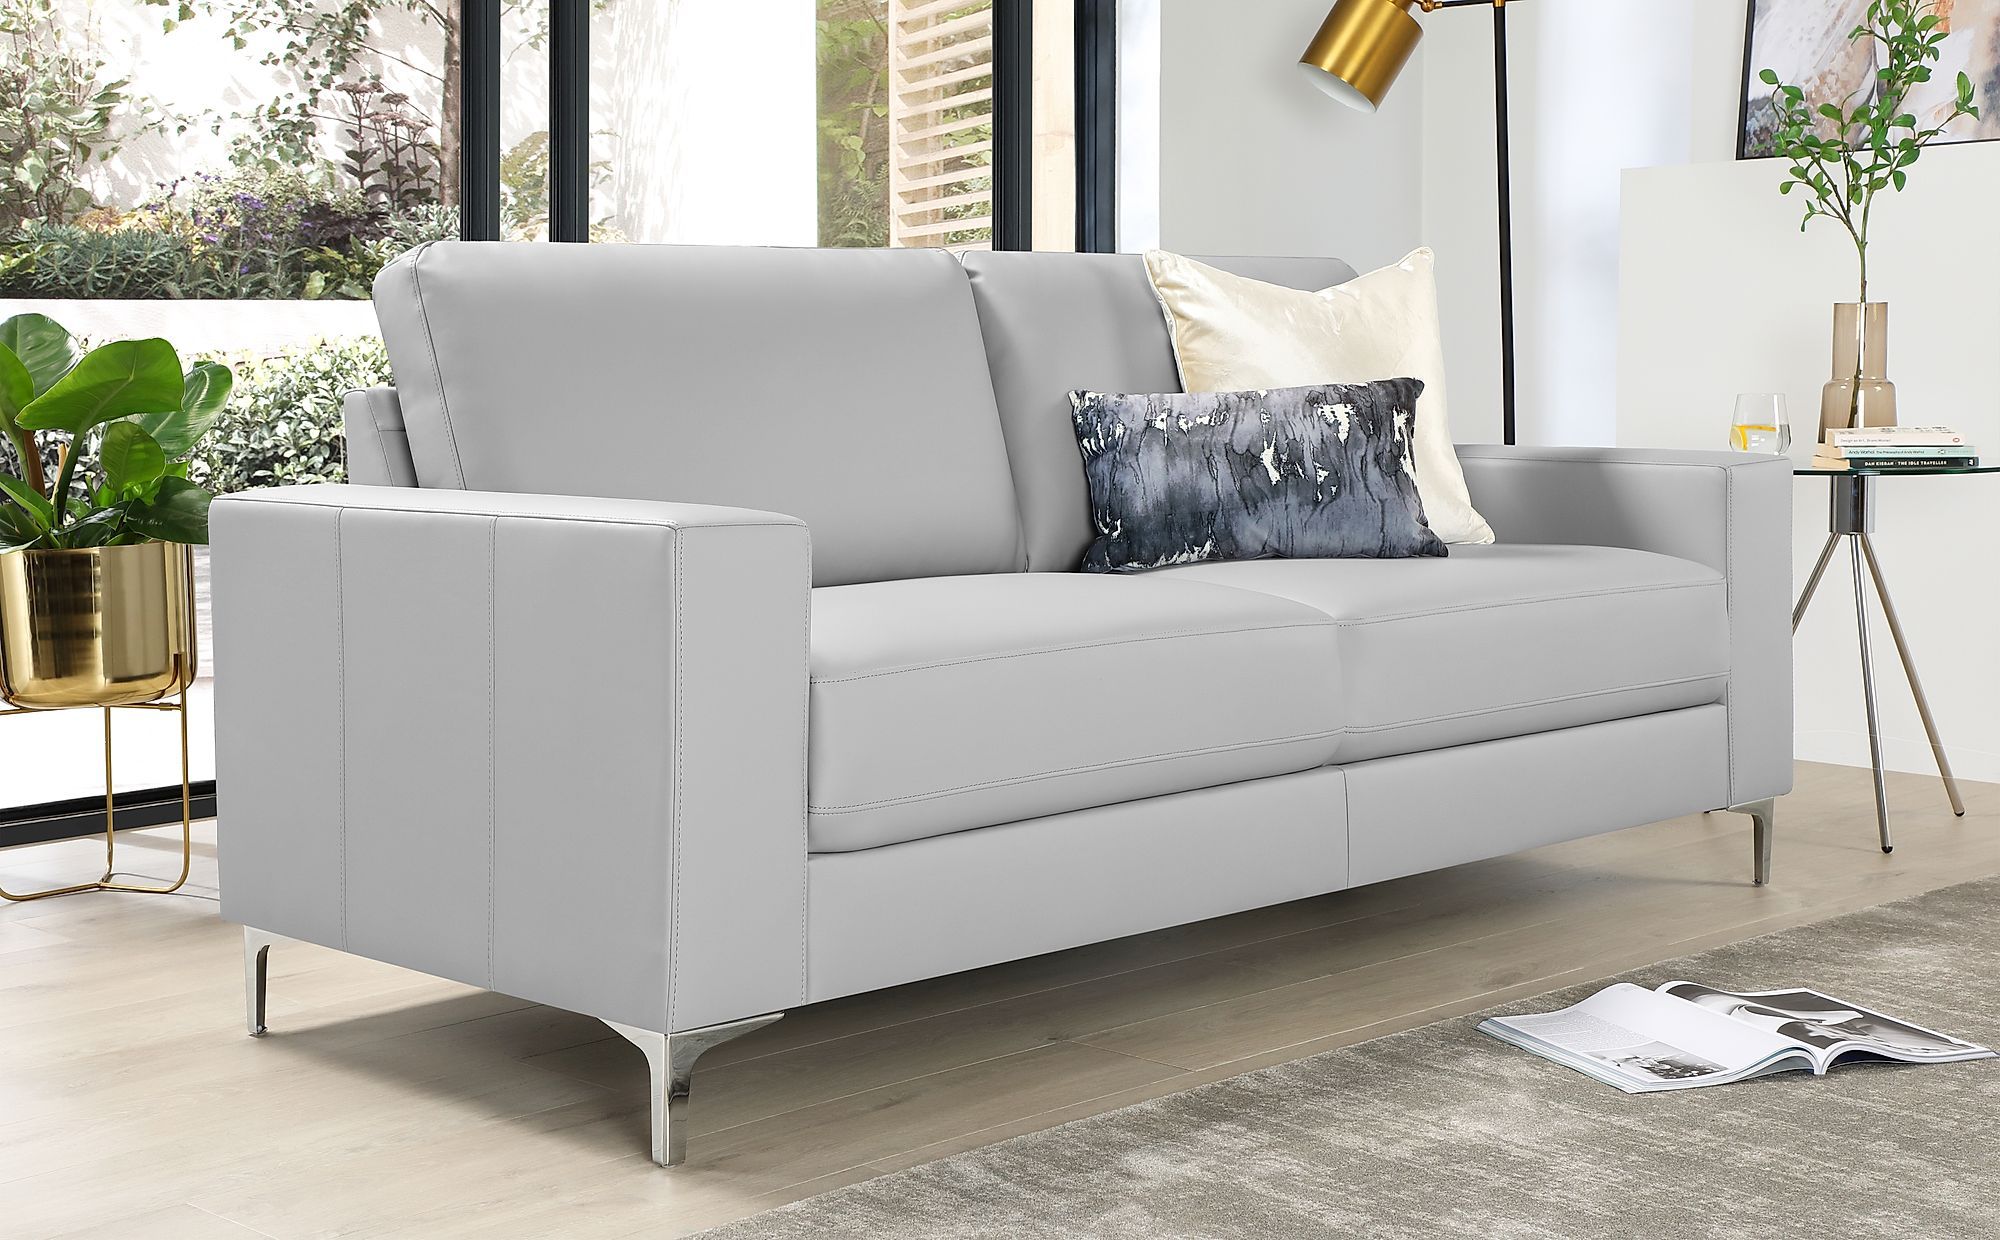 Baltimore Light Grey Leather 3 Seater Sofa | Furniture Choice Throughout Sofas In Light Gray (Gallery 3 of 22)